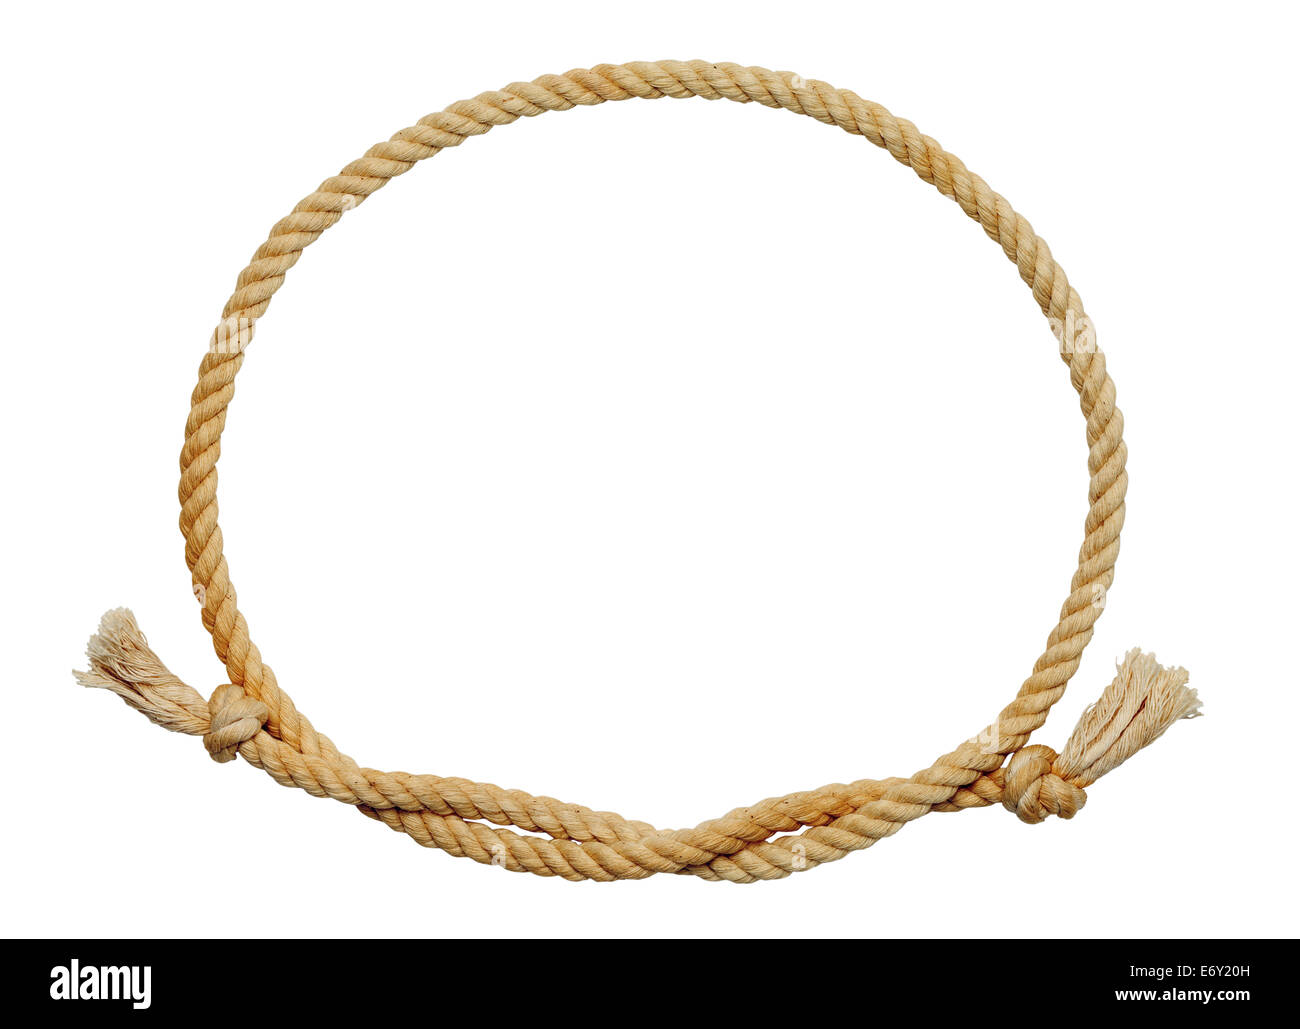 Old Dirty Rope Oval Frame Isolated on White Background. Stock Photo